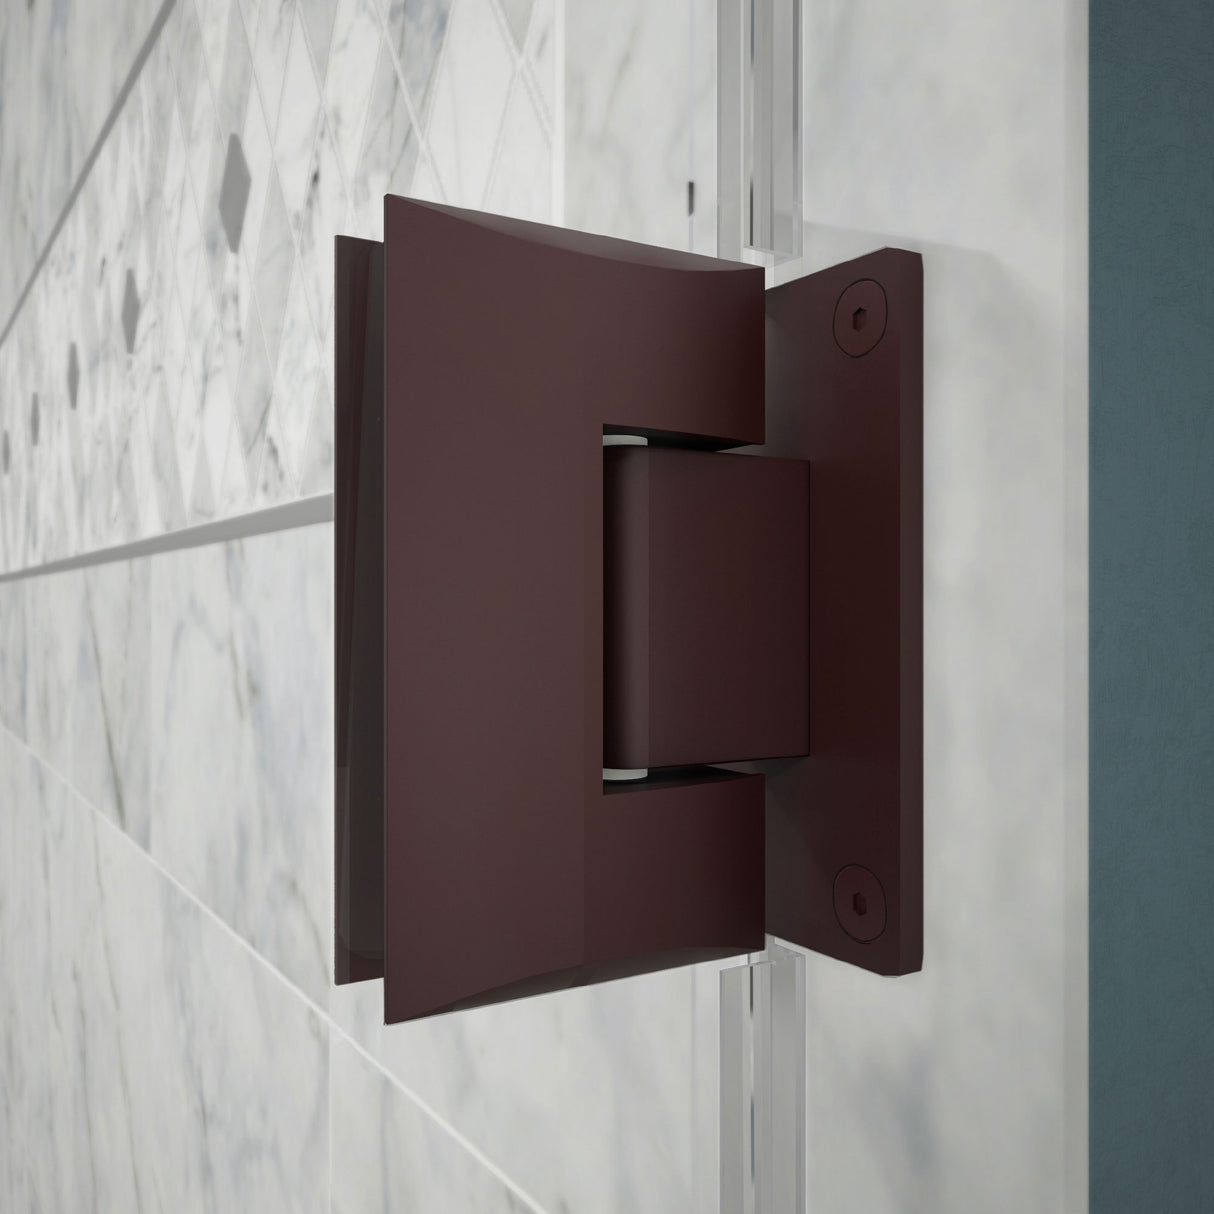 DreamLine Unidoor Plus 48 in. W x 34 3/8 in. D x 72 in. H Frameless Hinged Shower Enclosure in Oil Rubbed Bronze